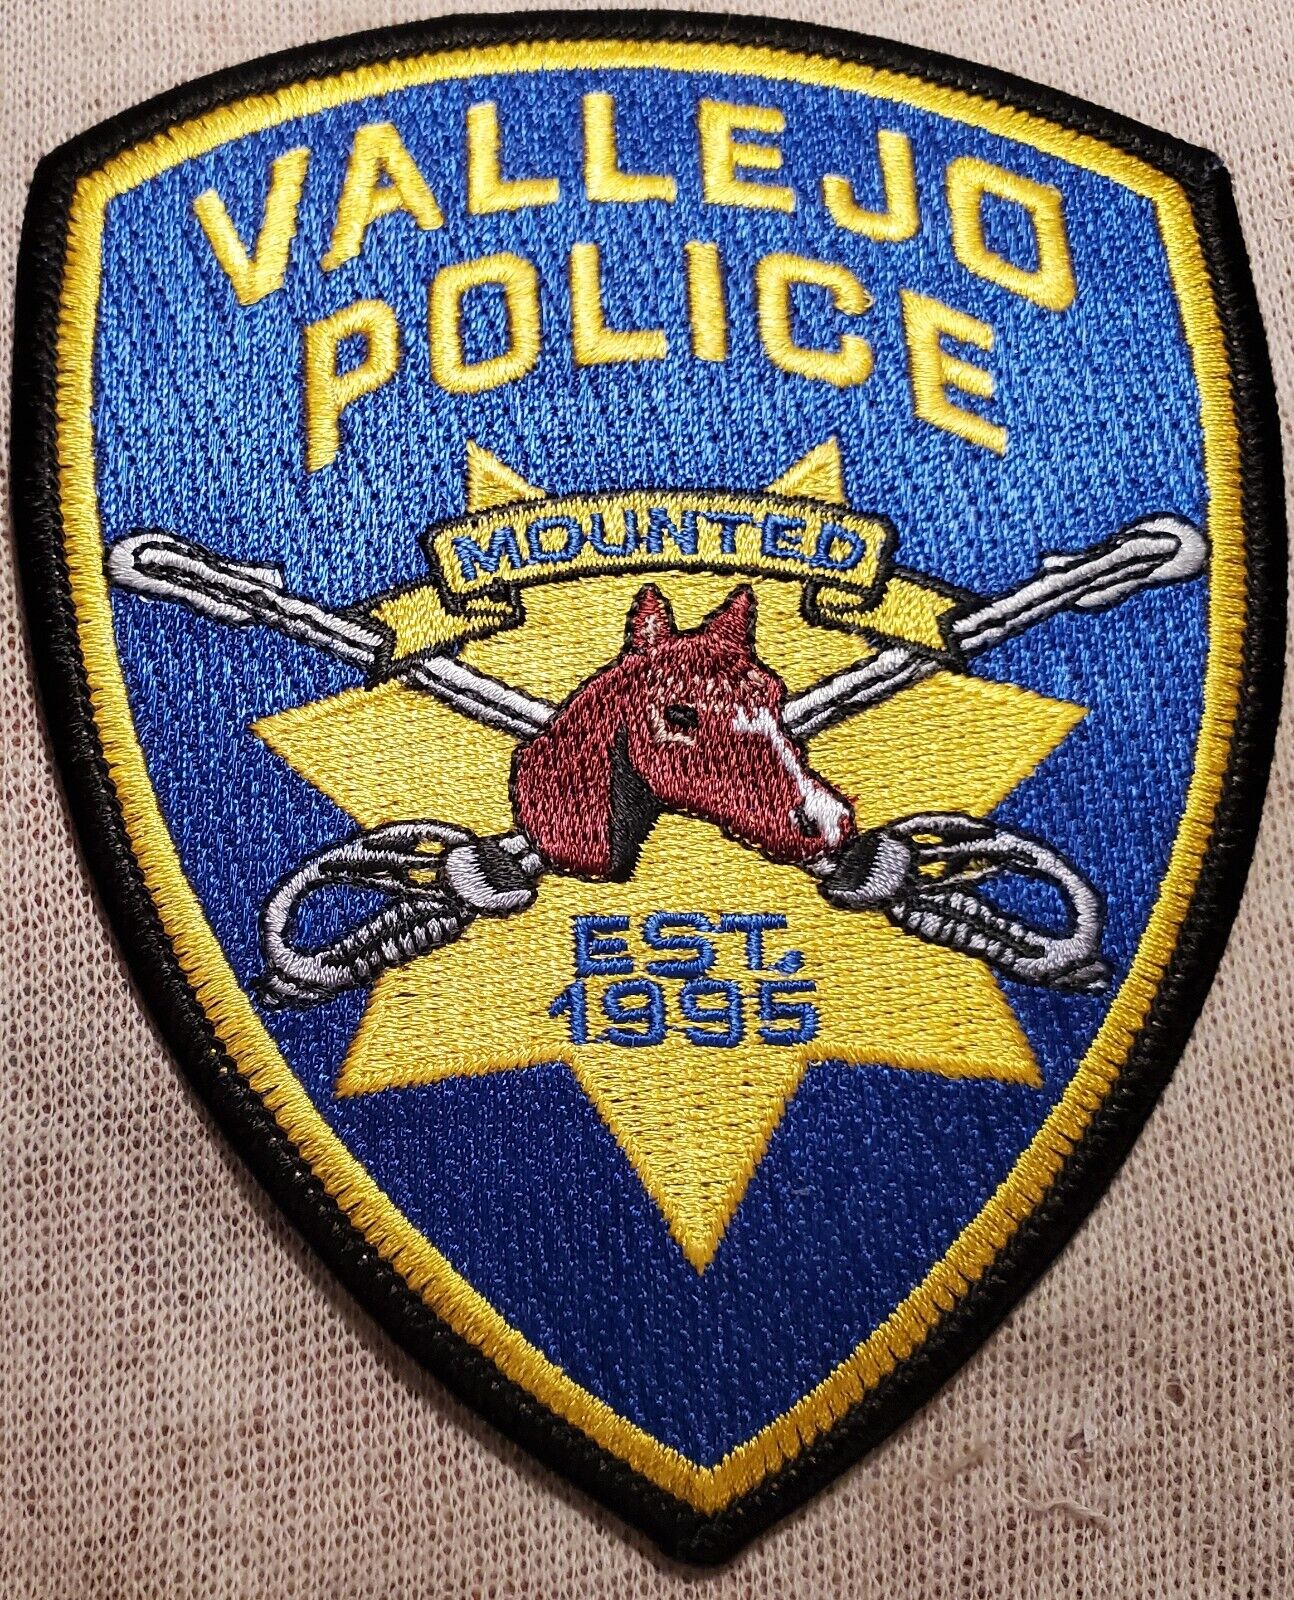 CA Vallejo California Mounted Unit Police Shoulder Patch